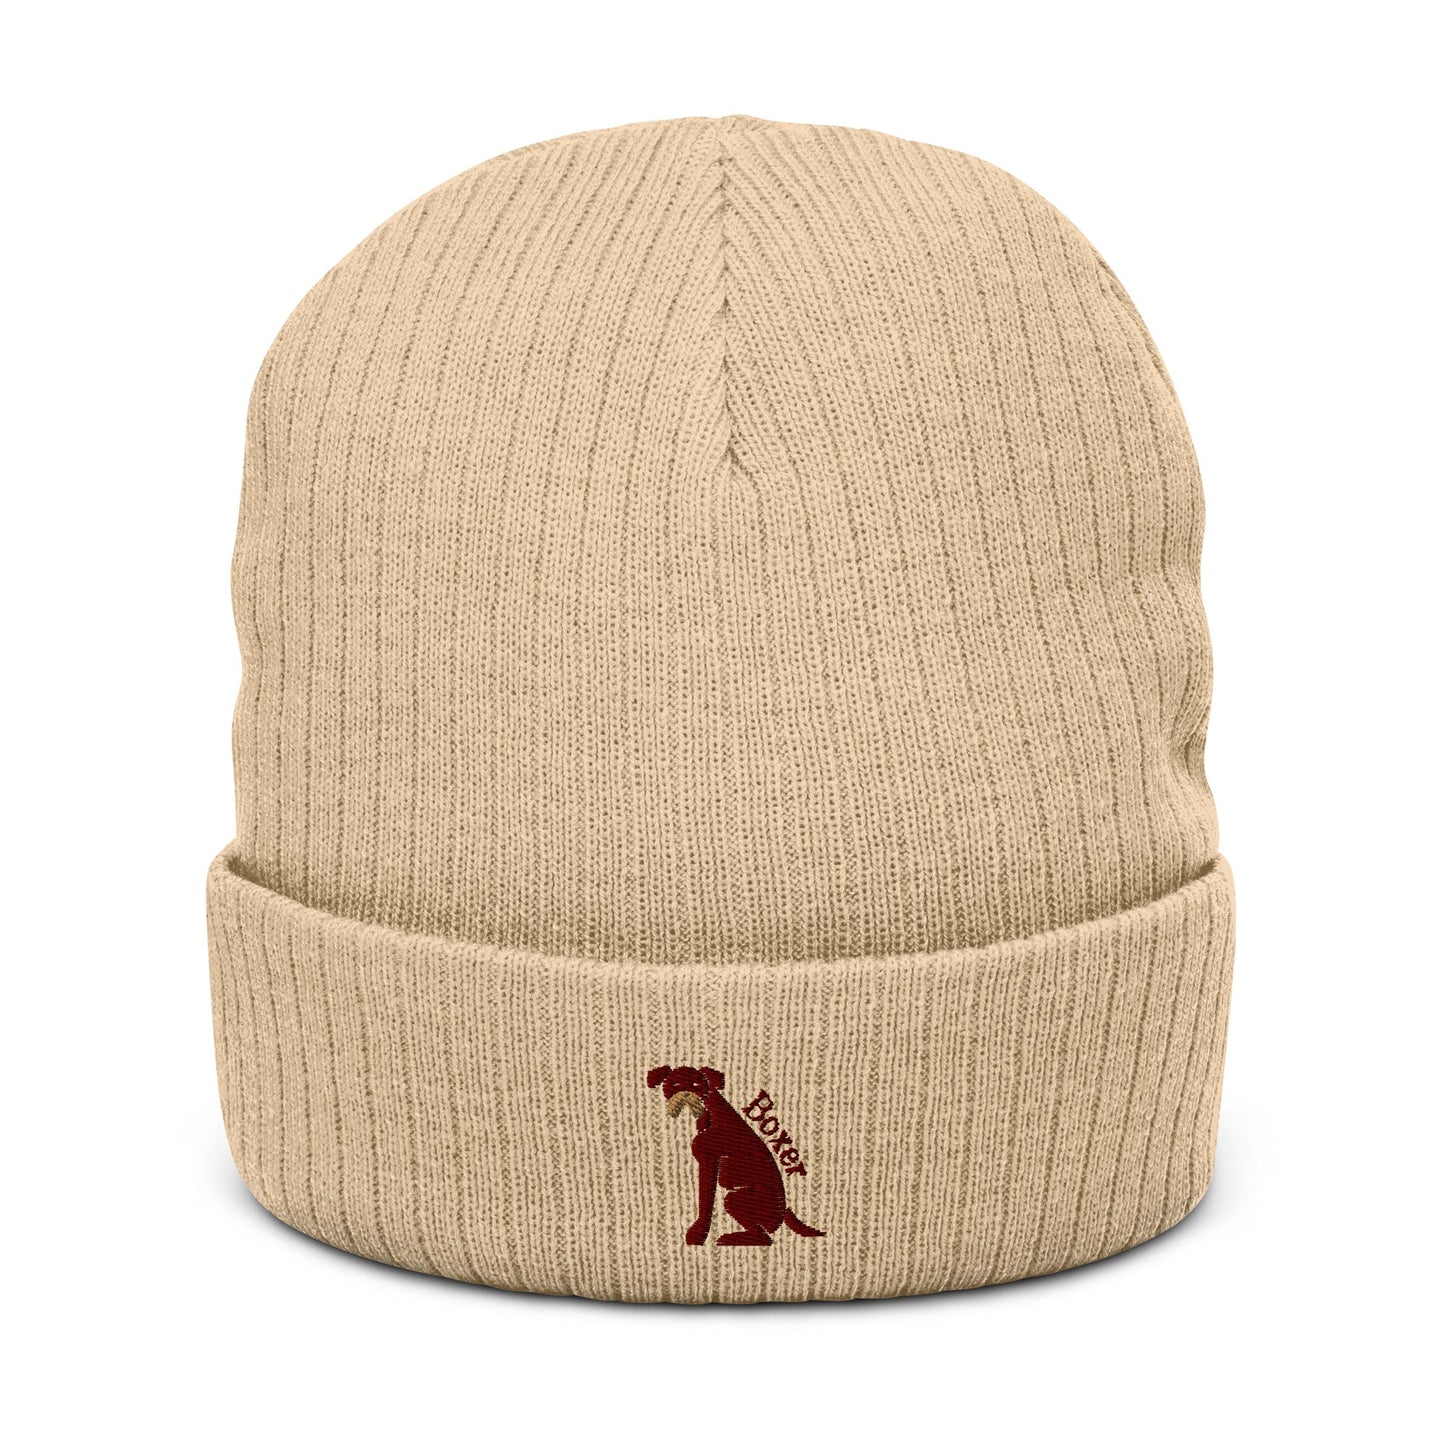 Ribbed beanie hat featuring embroidered Boxer dog logo - Hobbster